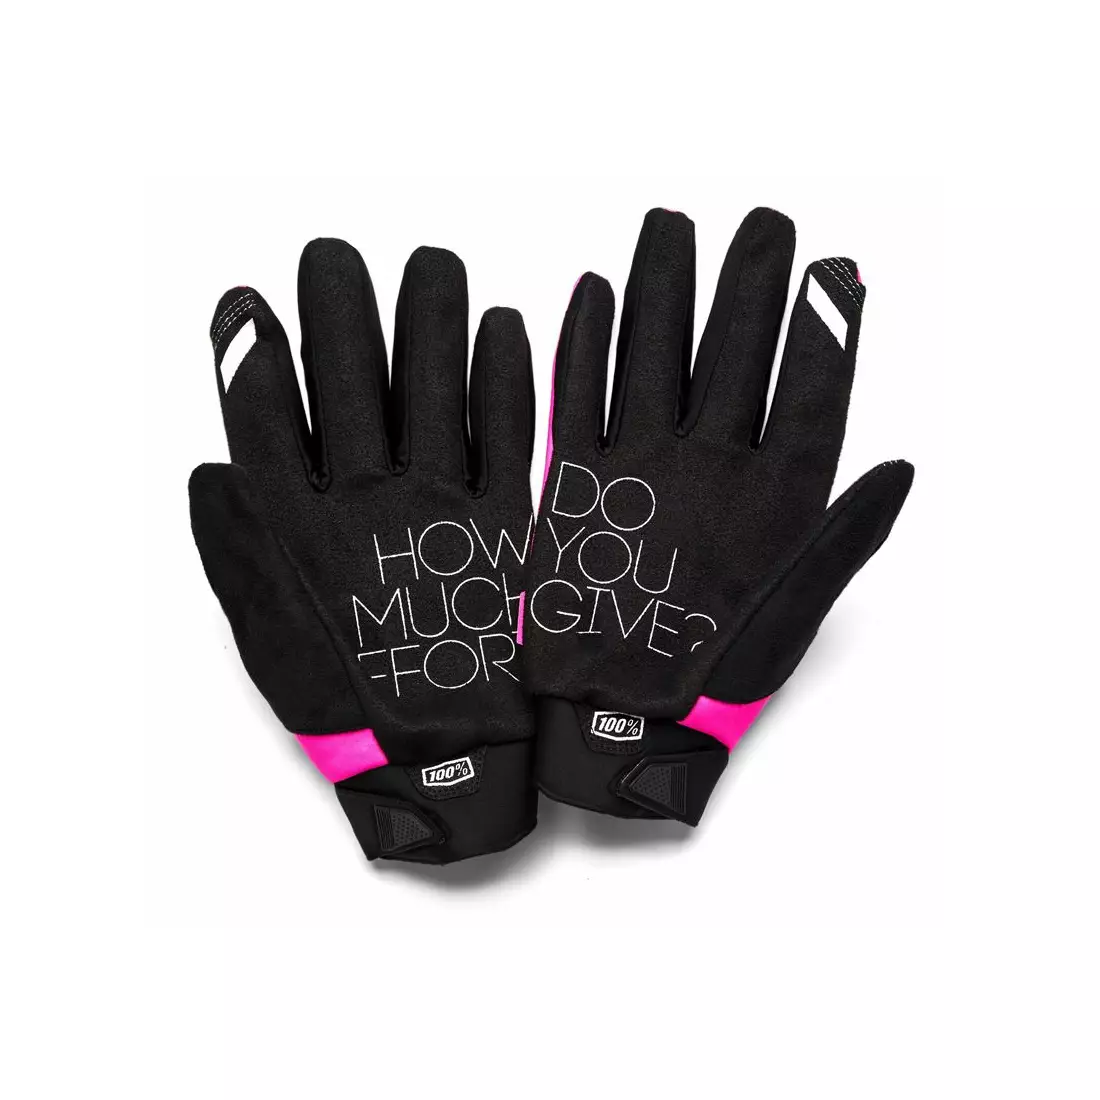 100% women's cycling gloves brisker cold weather, pink  STO-11016-263-10